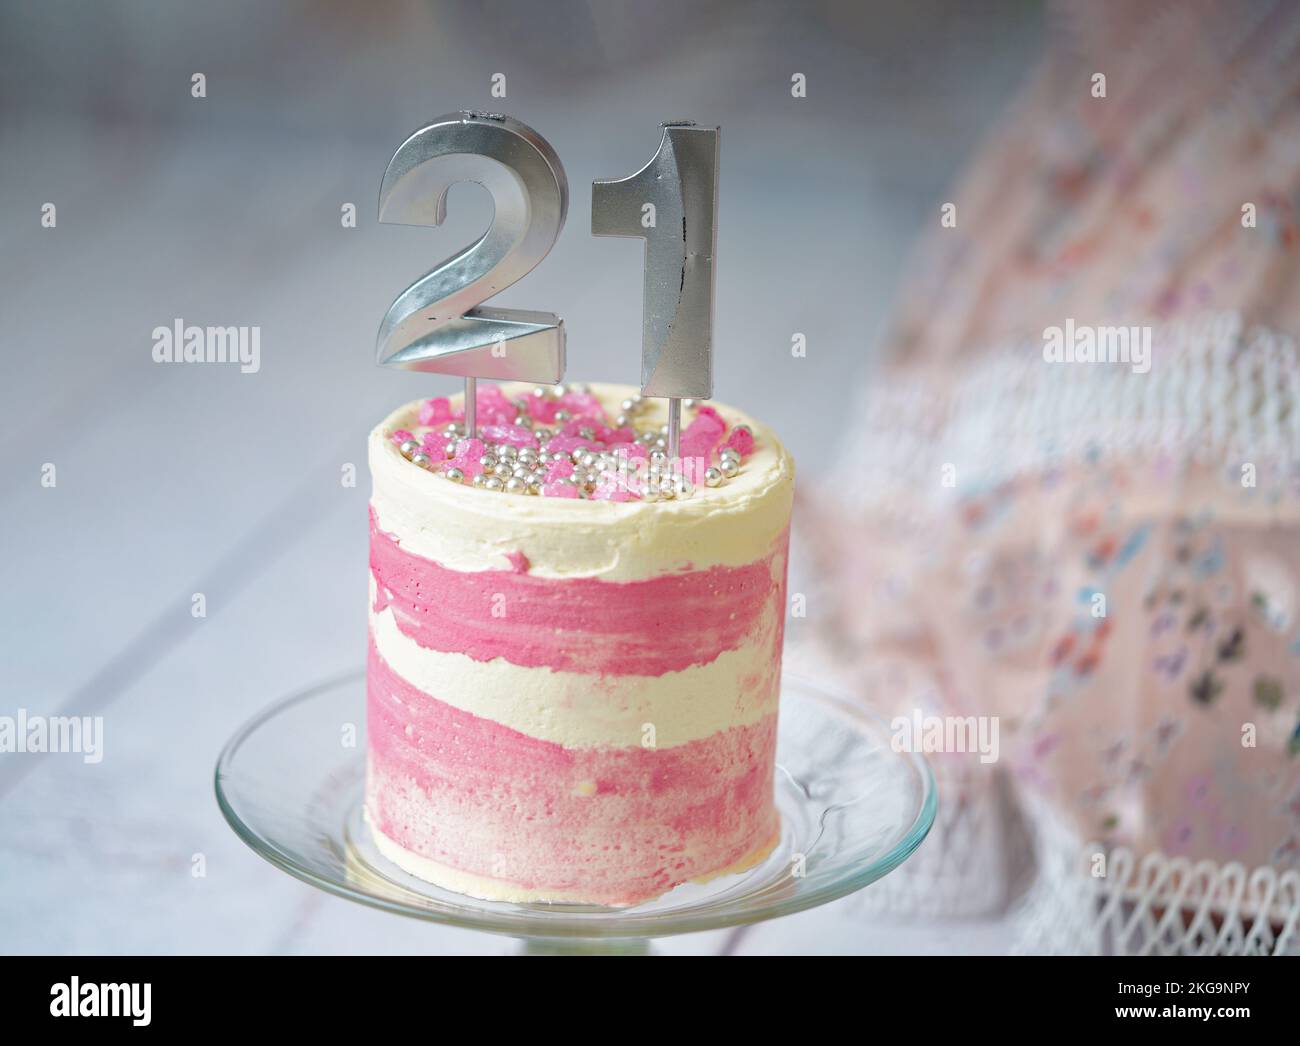 21st Birthday cake pink and silver cake with some sprinkles and 21st candlelight with a woman dress at the background. Stock Photo